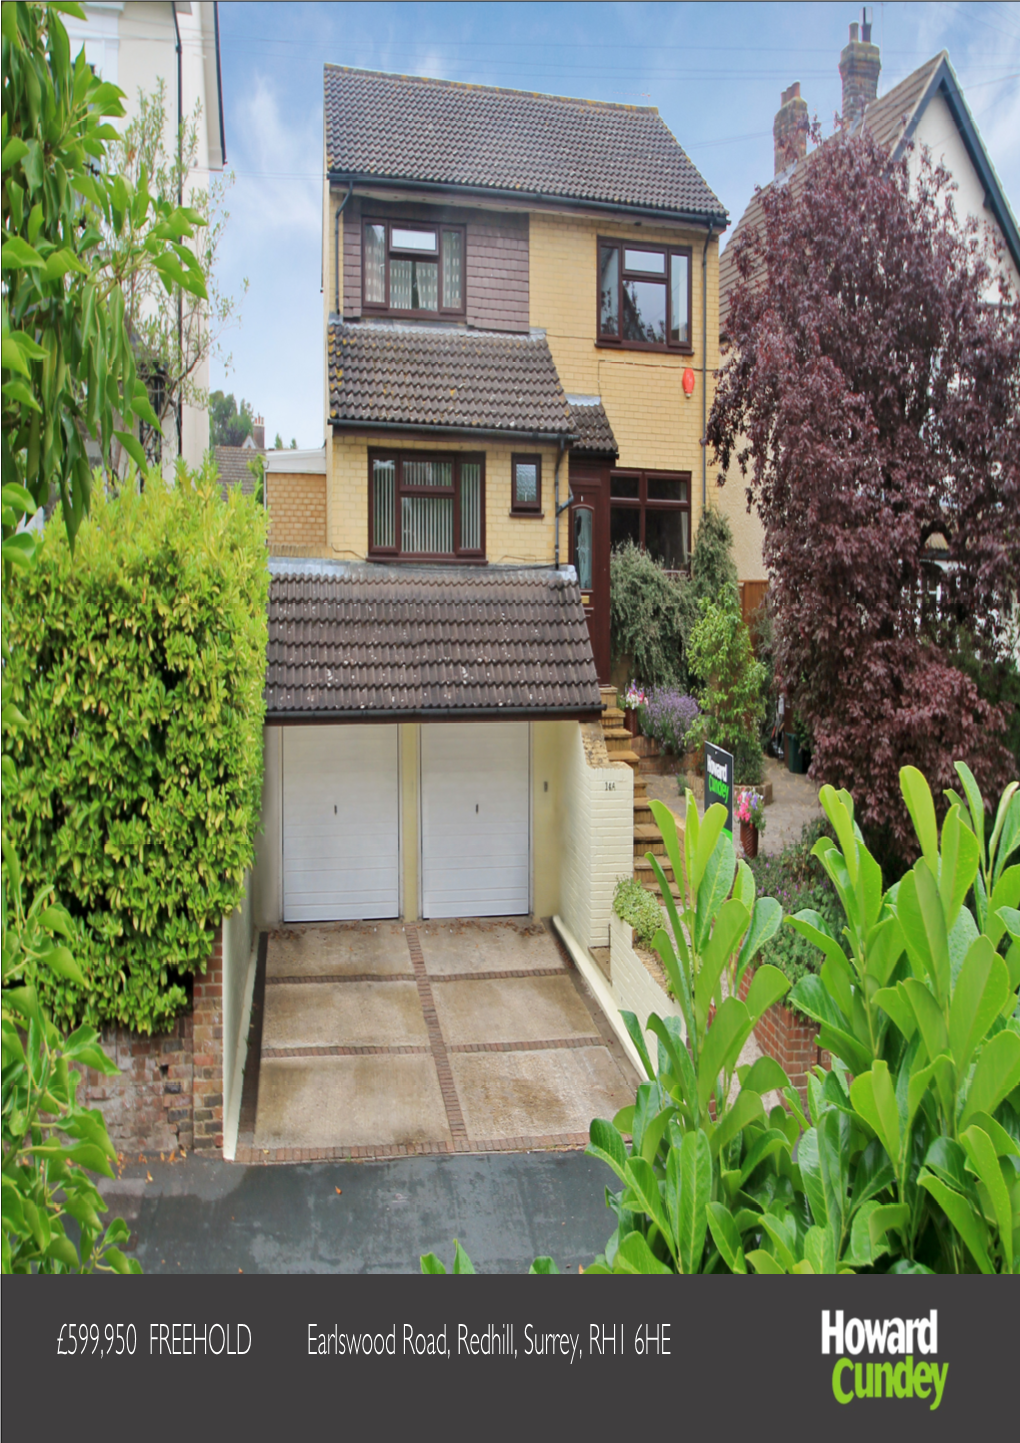 £599,950 FREEHOLD Earlswood Road, Redhill, Surrey, RH1 6HE